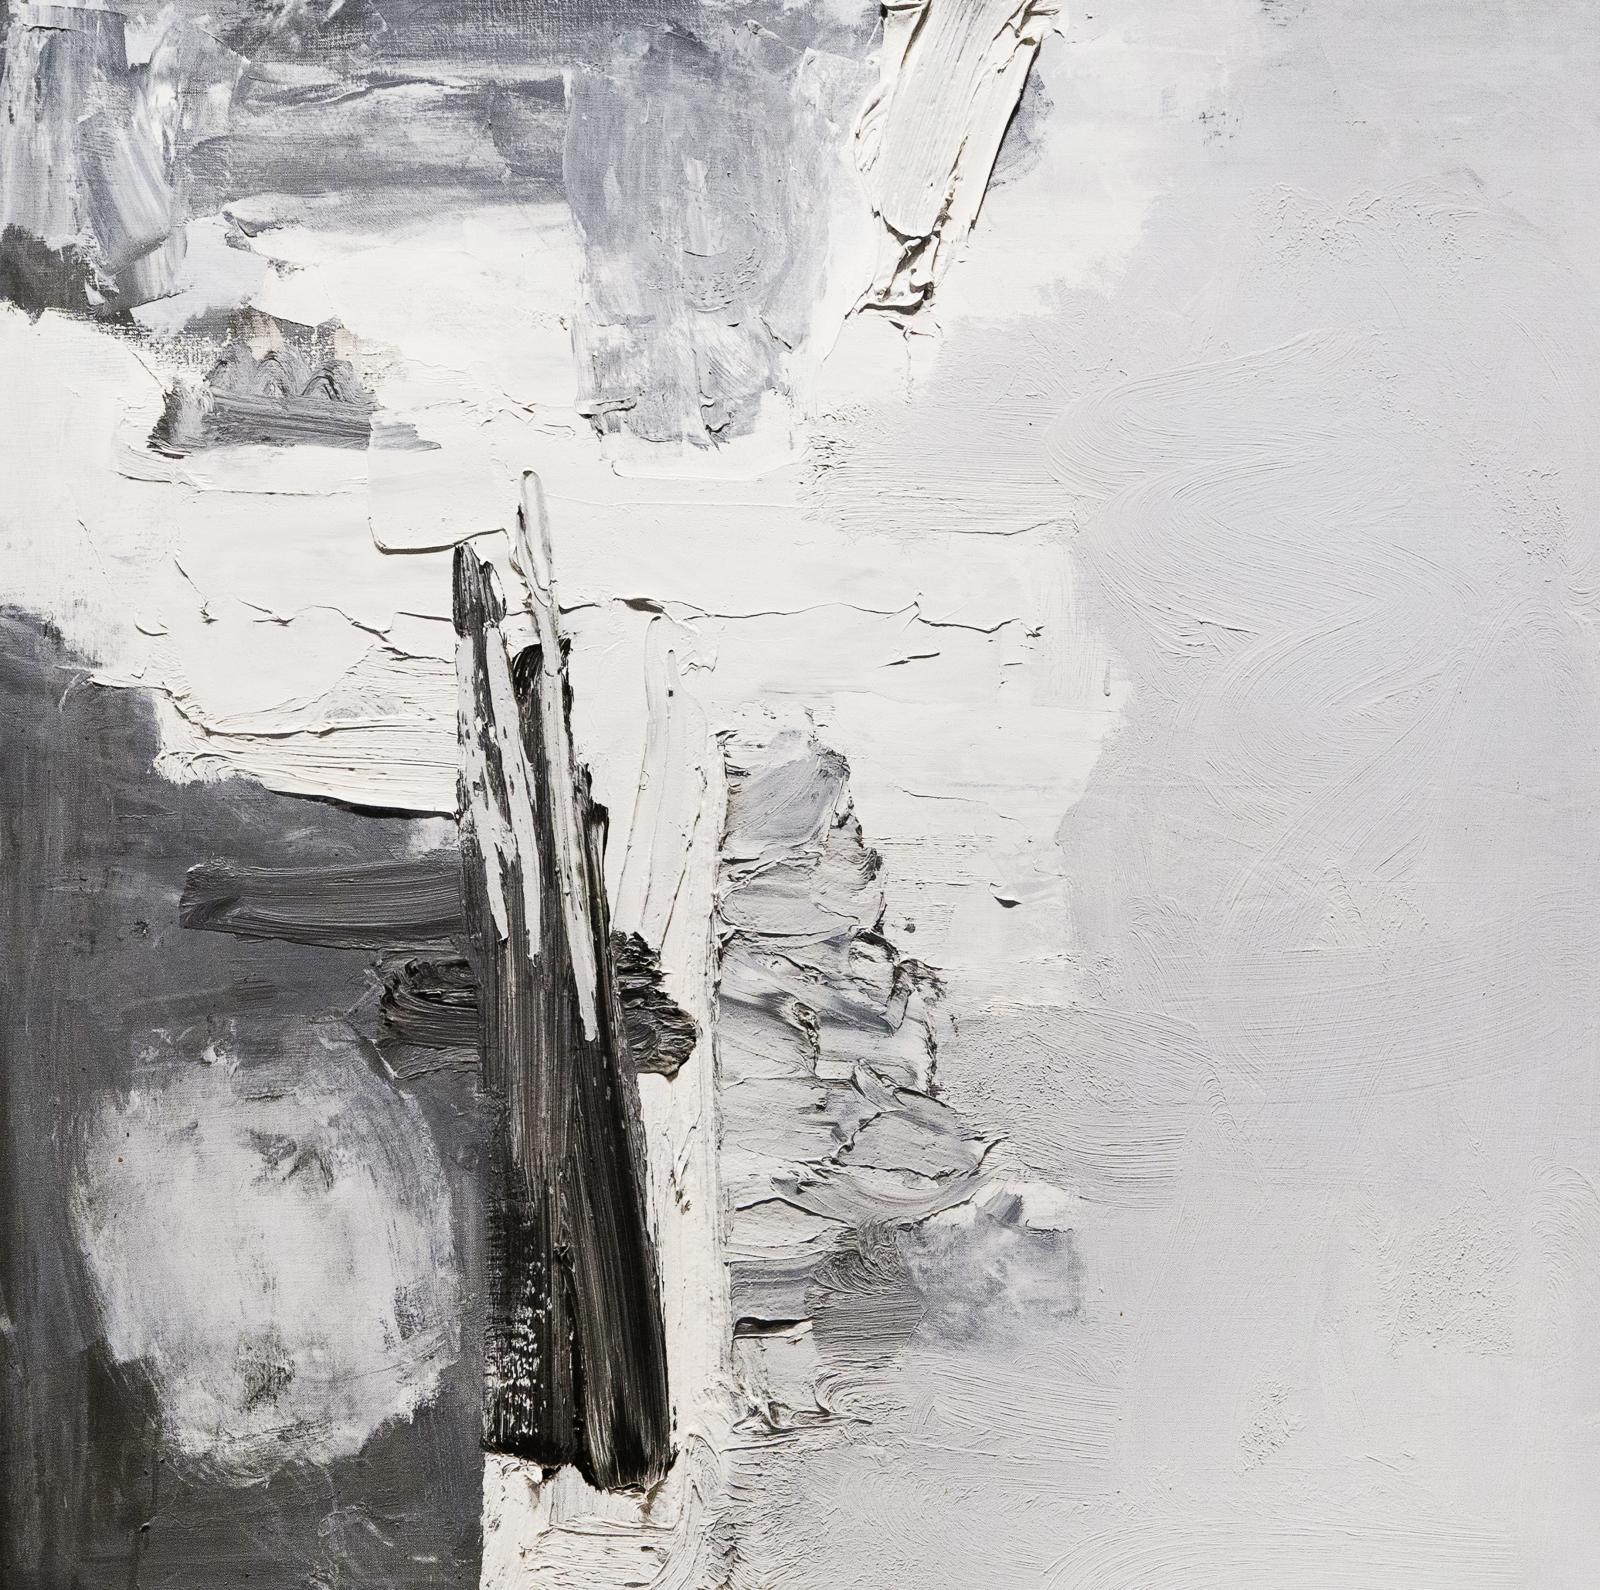 An abstract painting in black, grey, and white